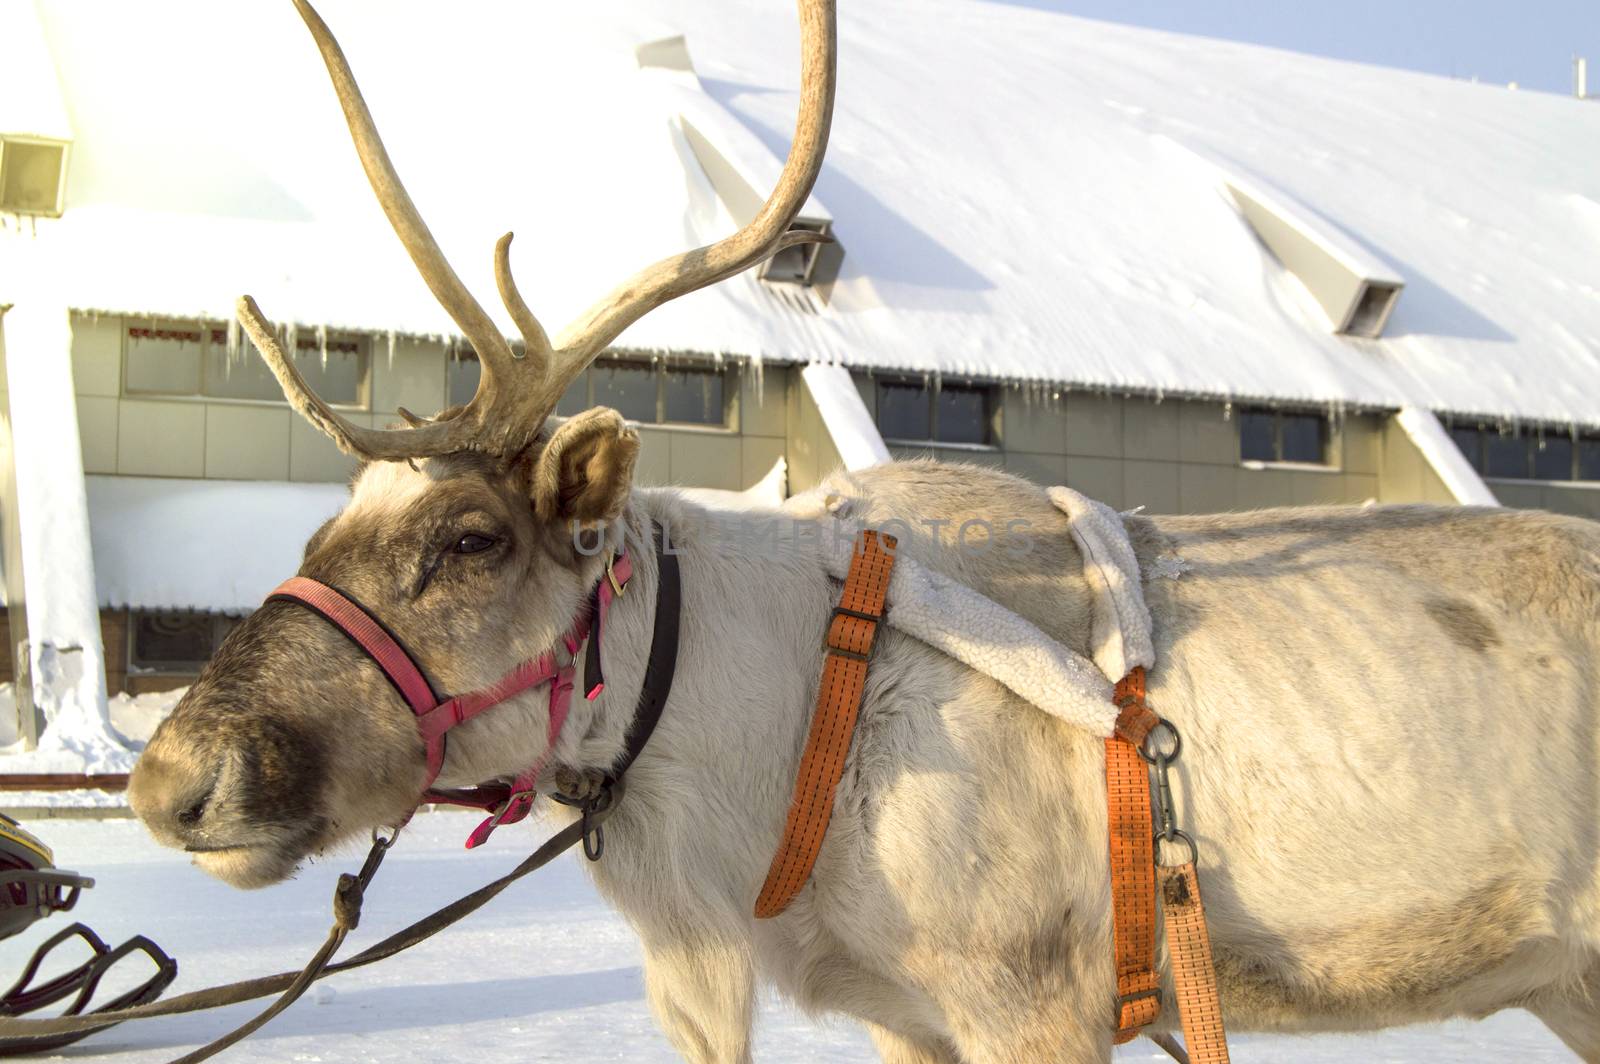 Symbol of Christmas - reindeer pulled in a sleigh with beautiful horns standing on the snow on a Sunny winter day